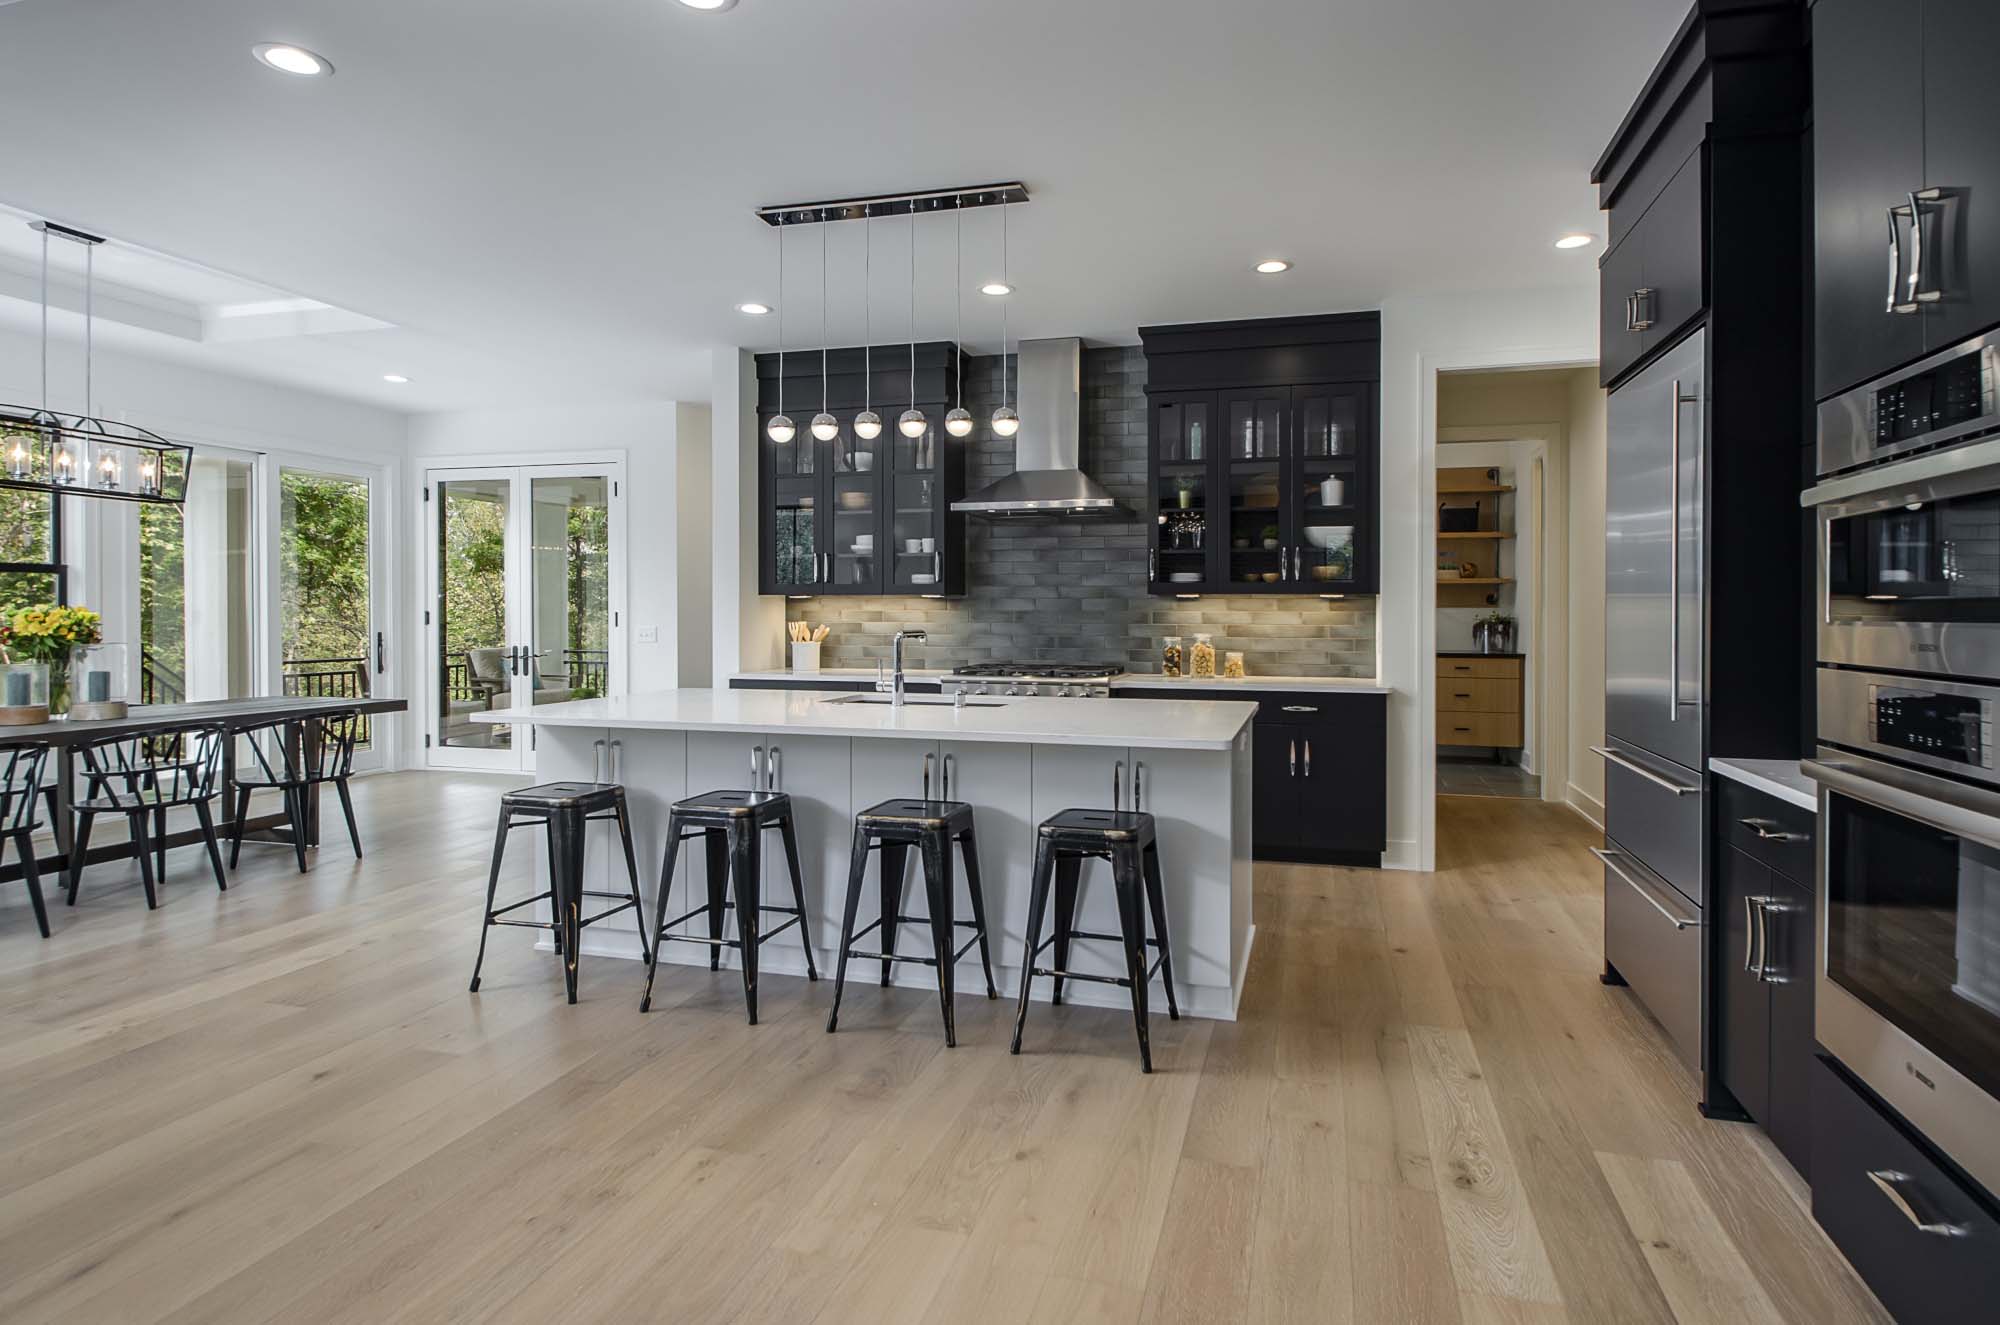 A modern kitchen with black cabinets and hardwood floors.